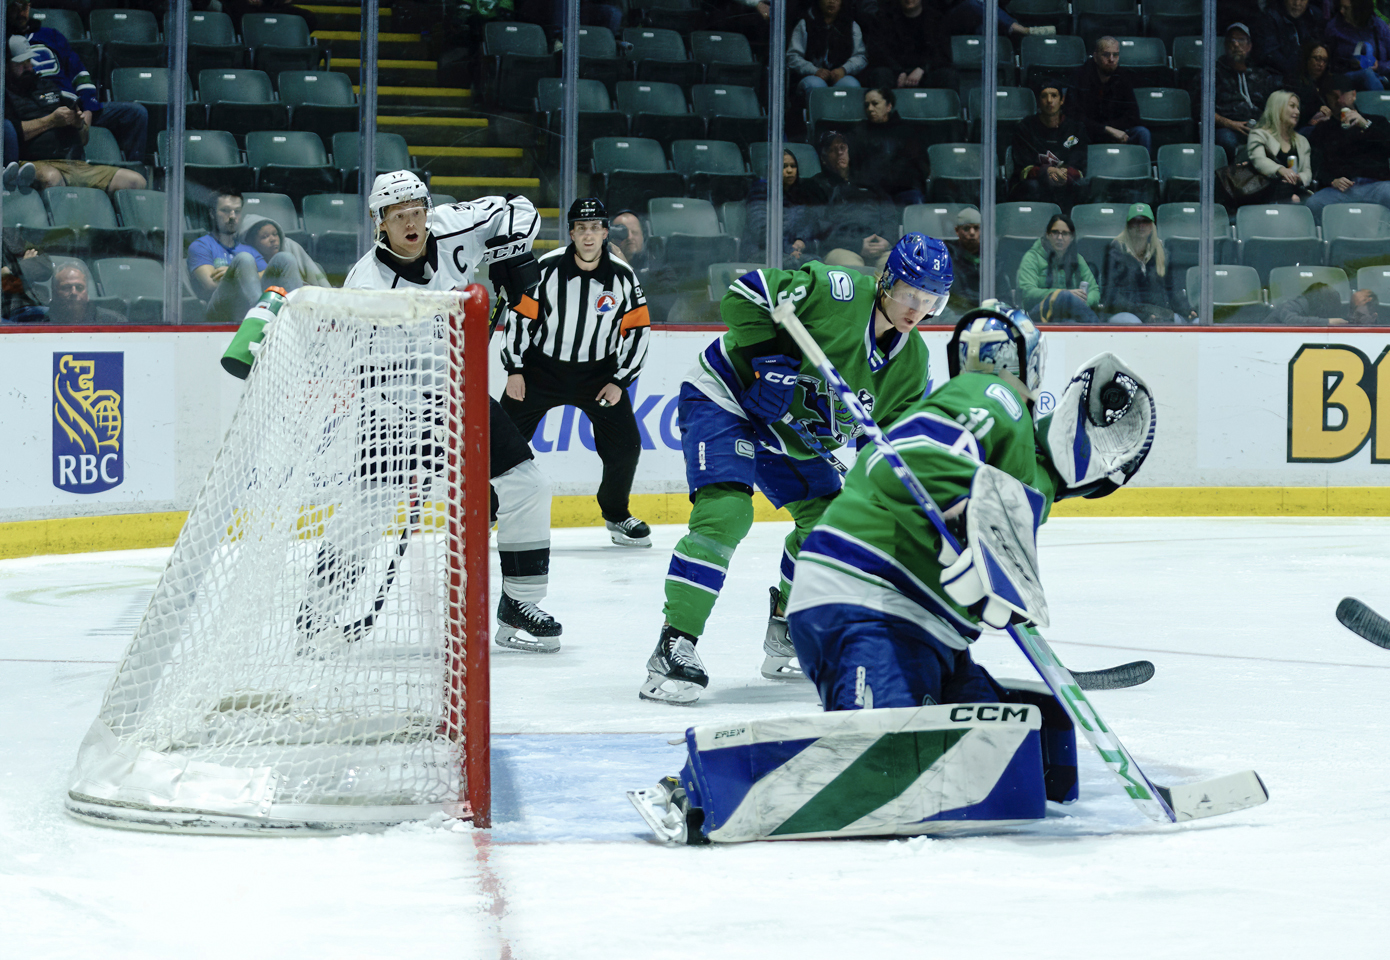 Abbotsford Canucks close to clinching home ice in round one of